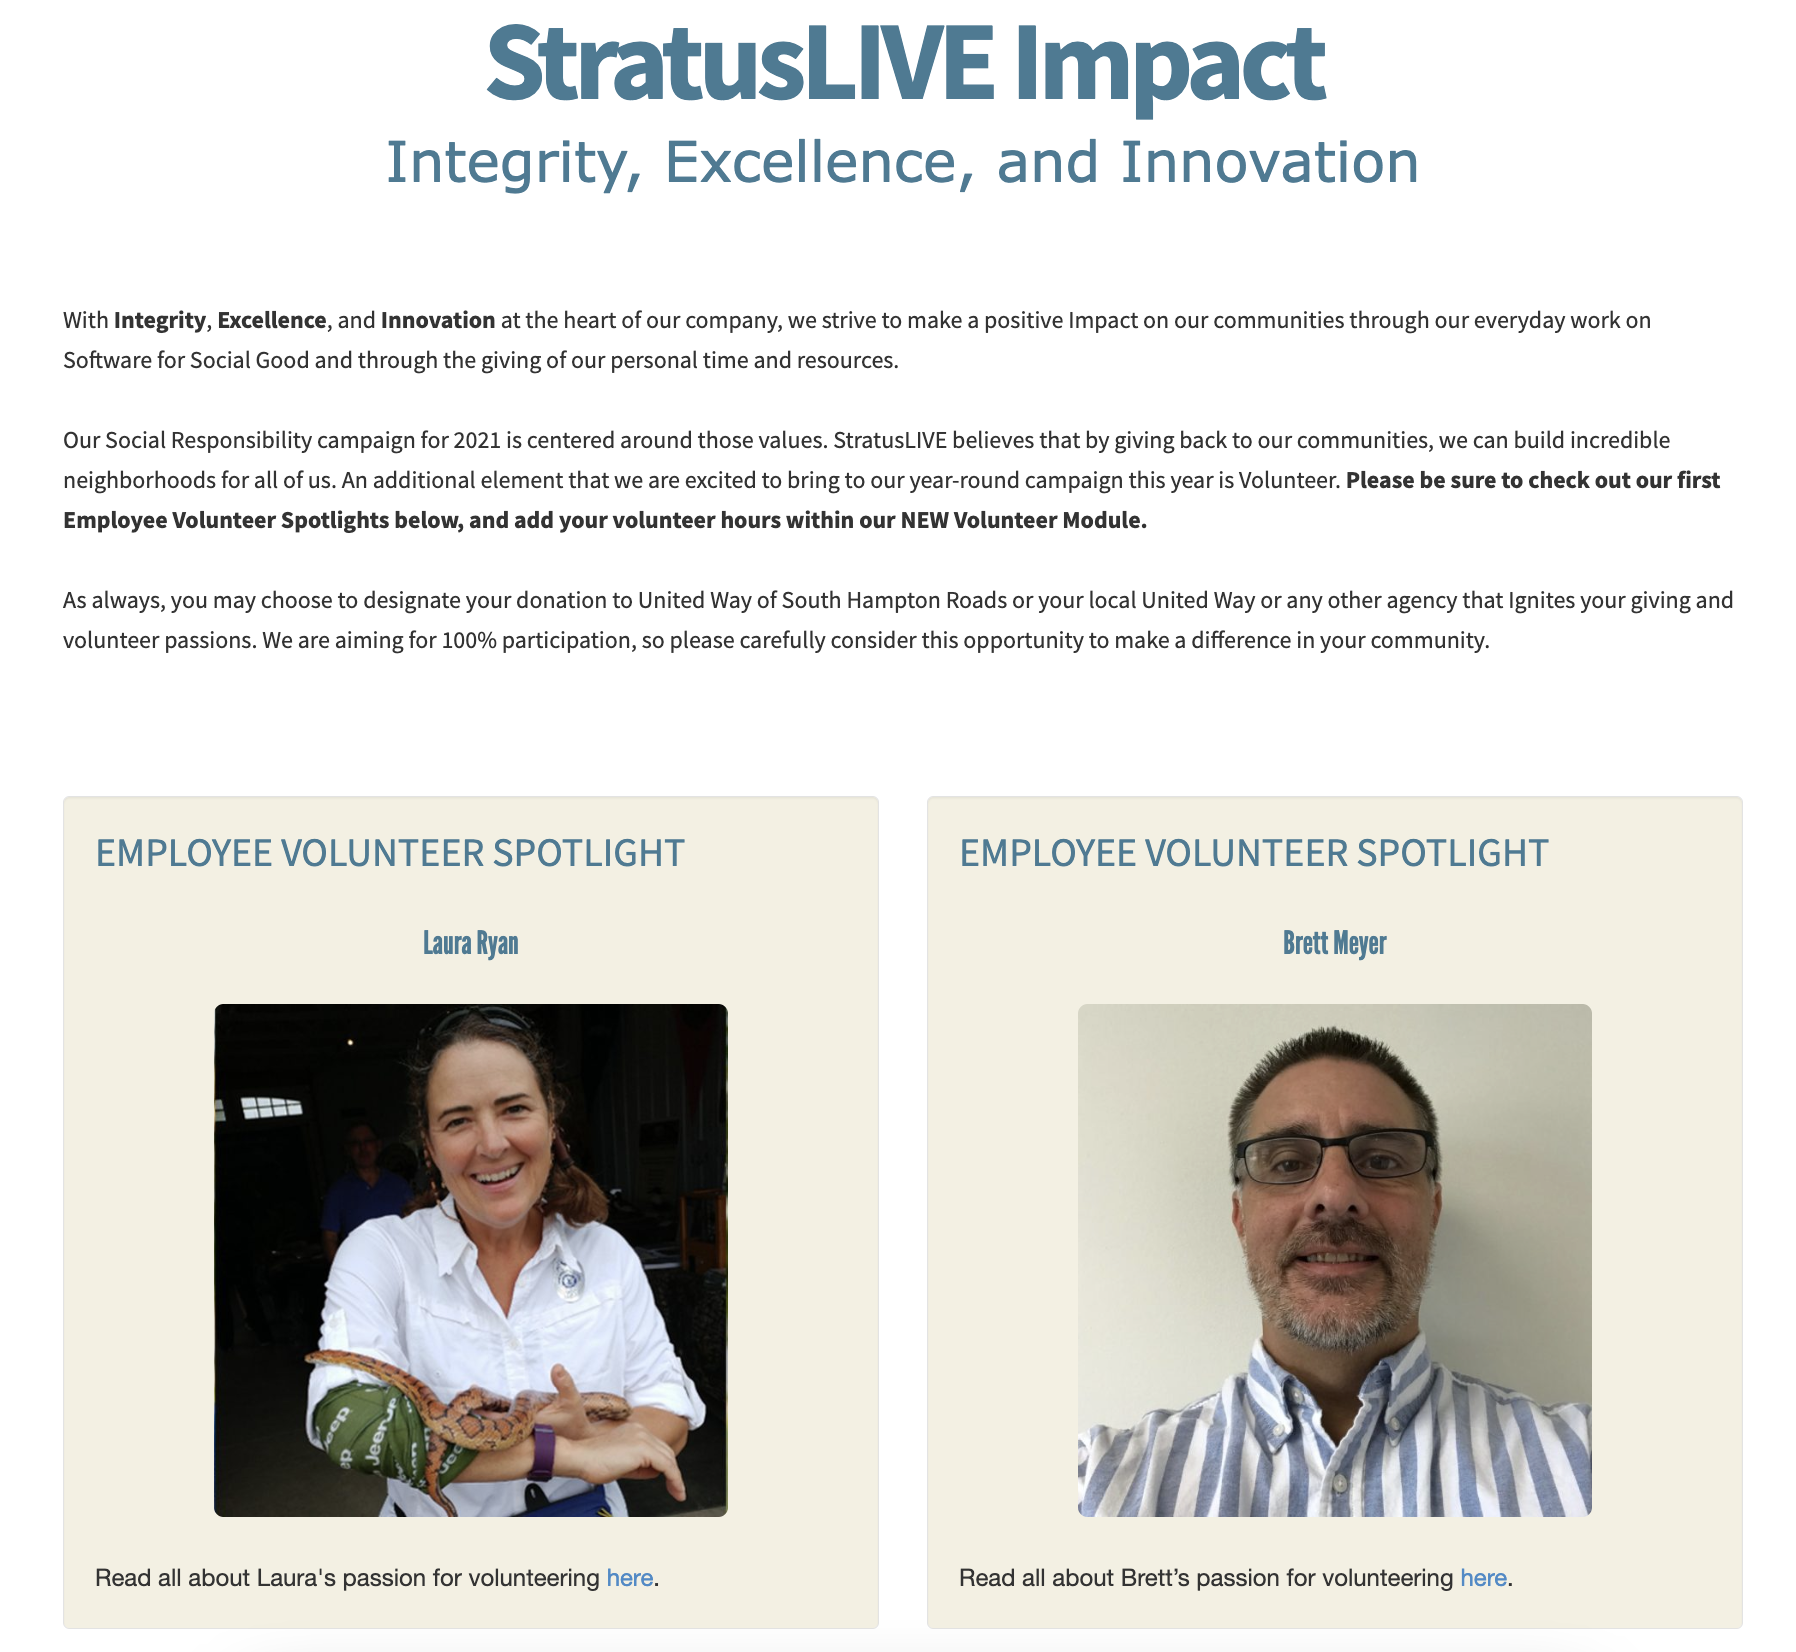 StratusLIVE Ignite Give at Work Employee Spotlight